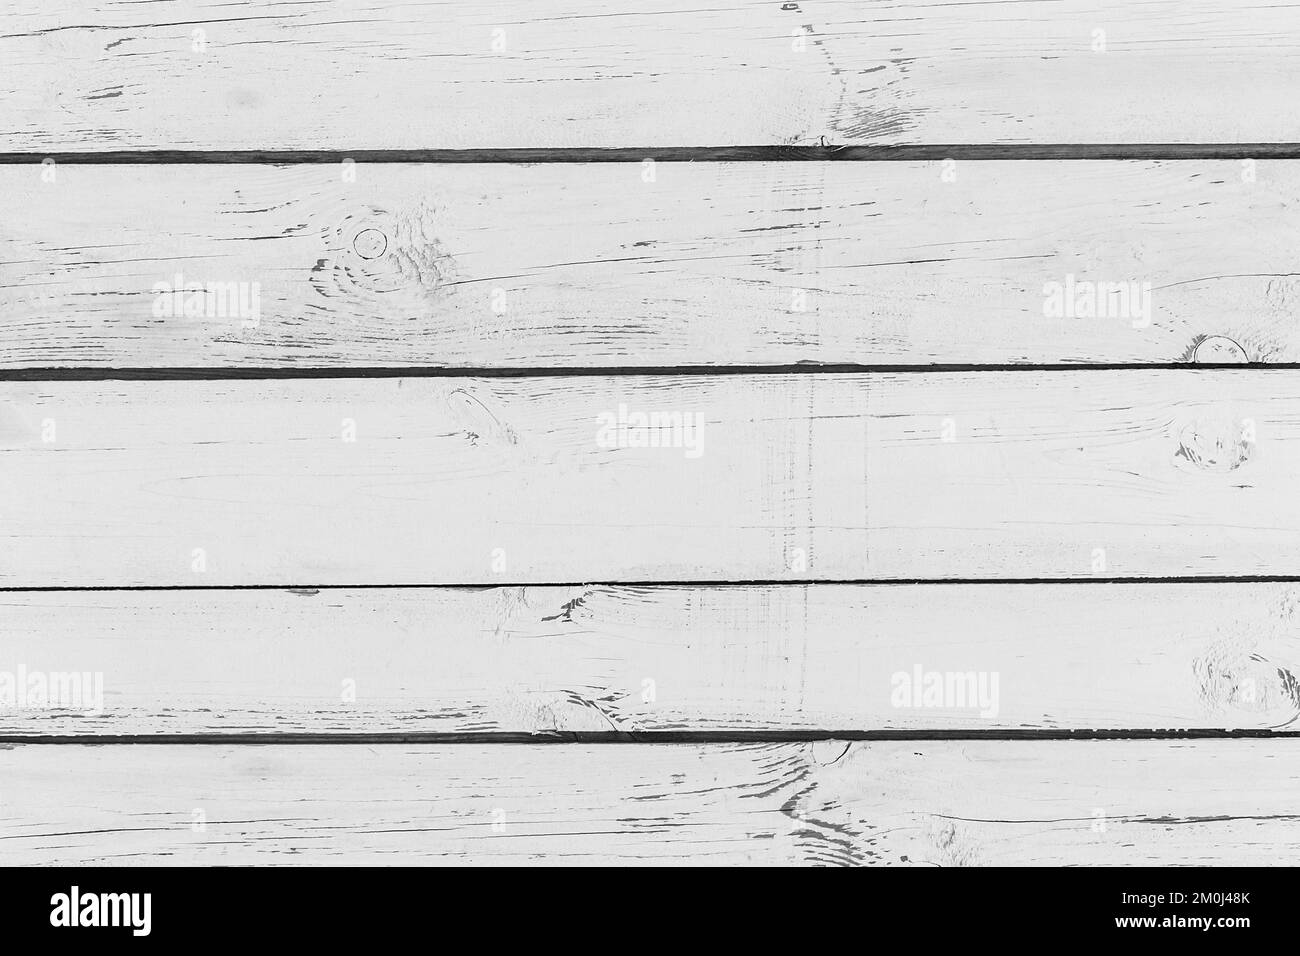 White fence boards, light wooden texture plank background. Stock Photo